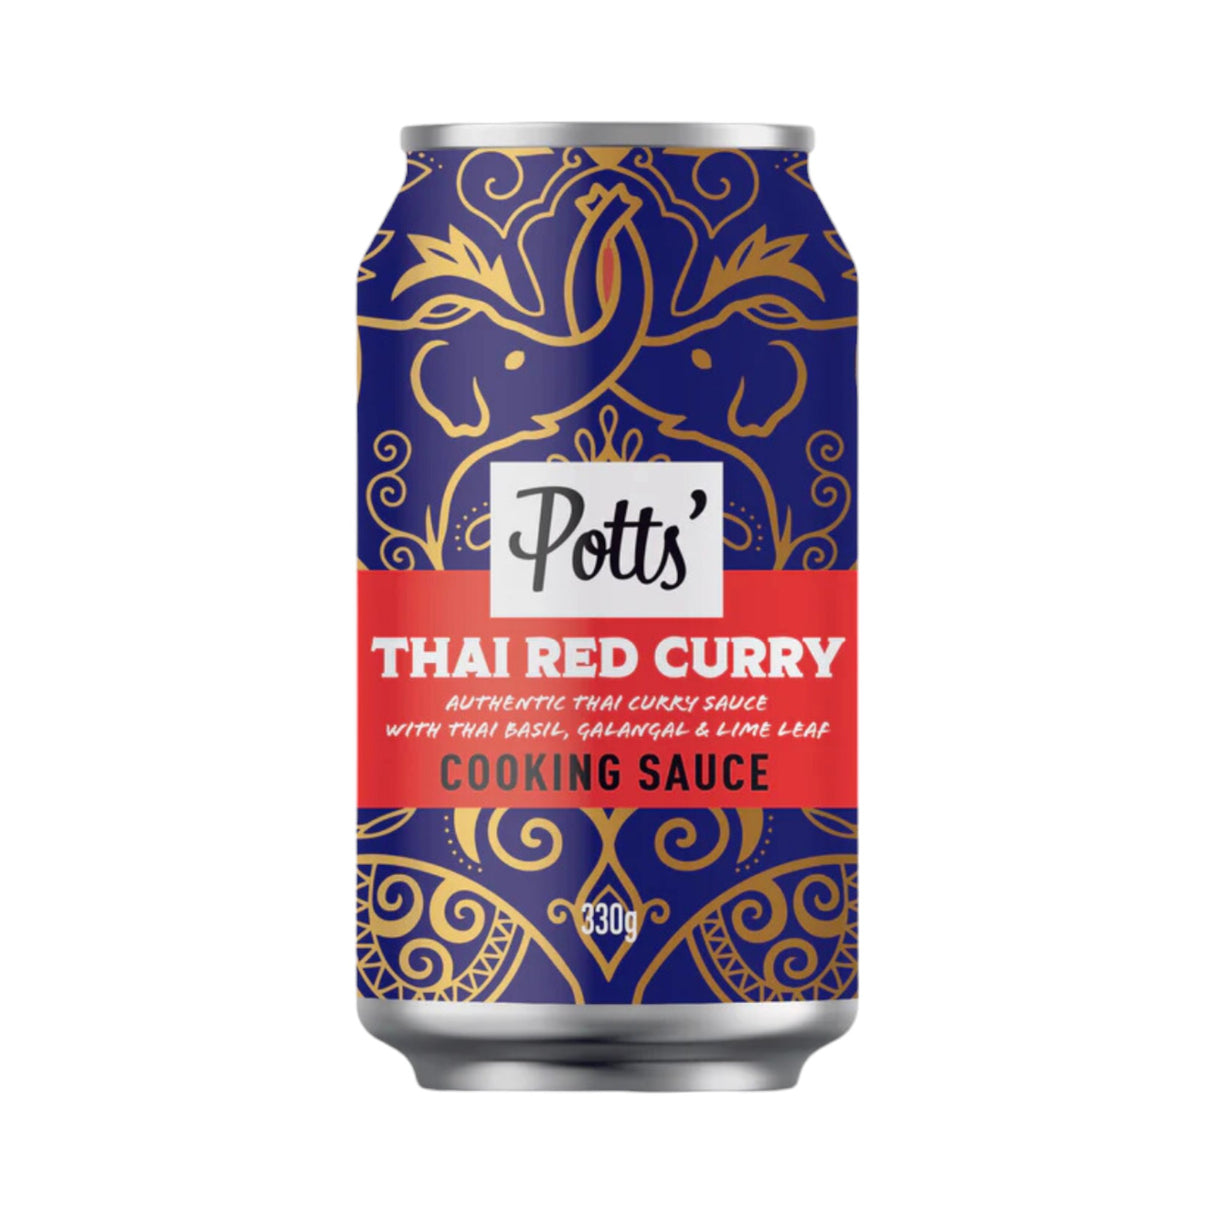 Potts - Thai Red Curry Cooking Sauce Can 330g